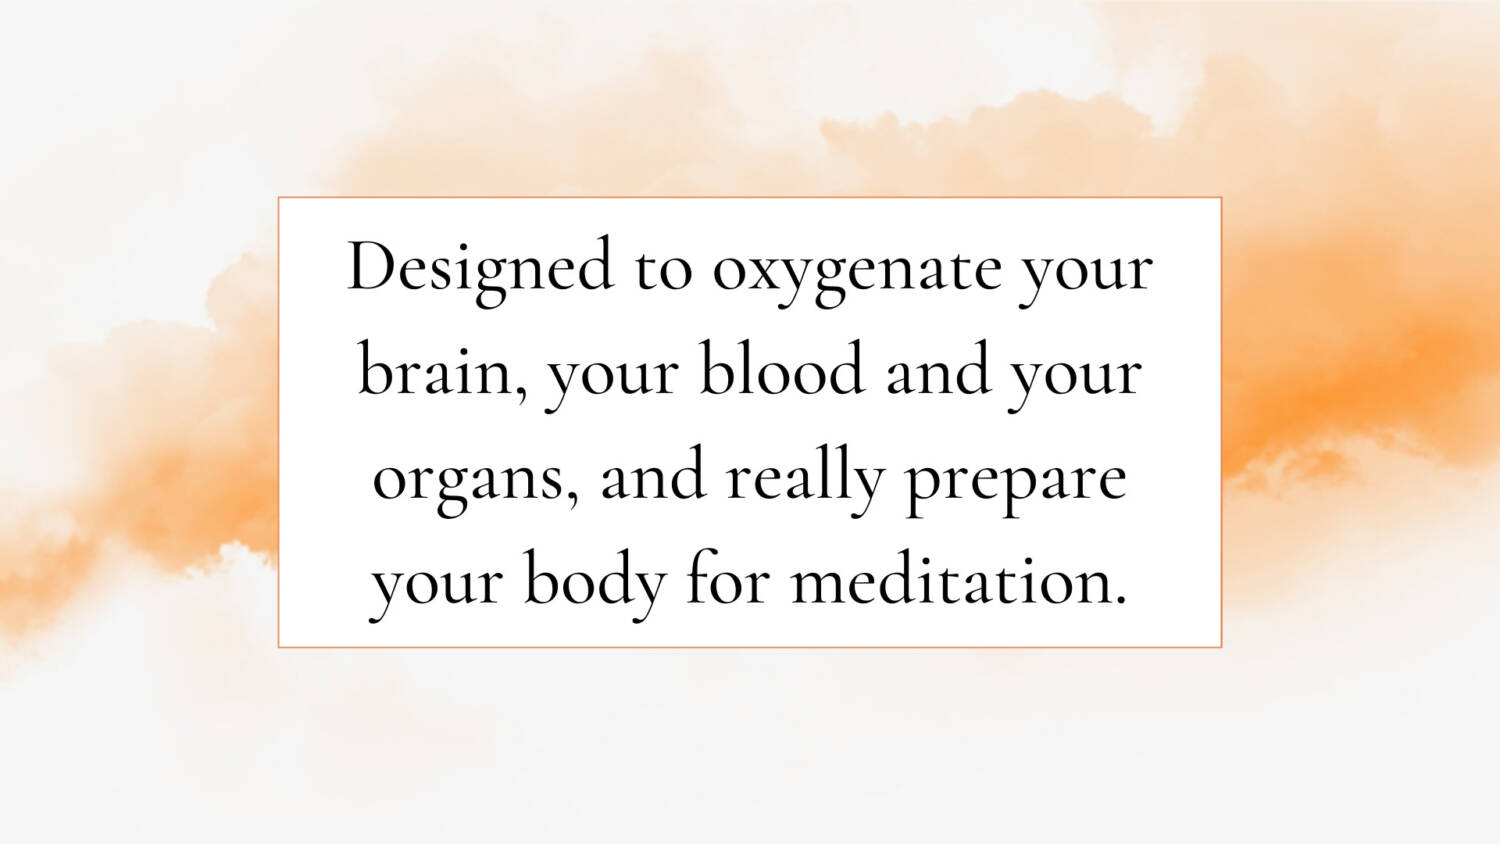 Designed to oxygenate your brain, your blood and your organs, and really prepare your body for meditation.